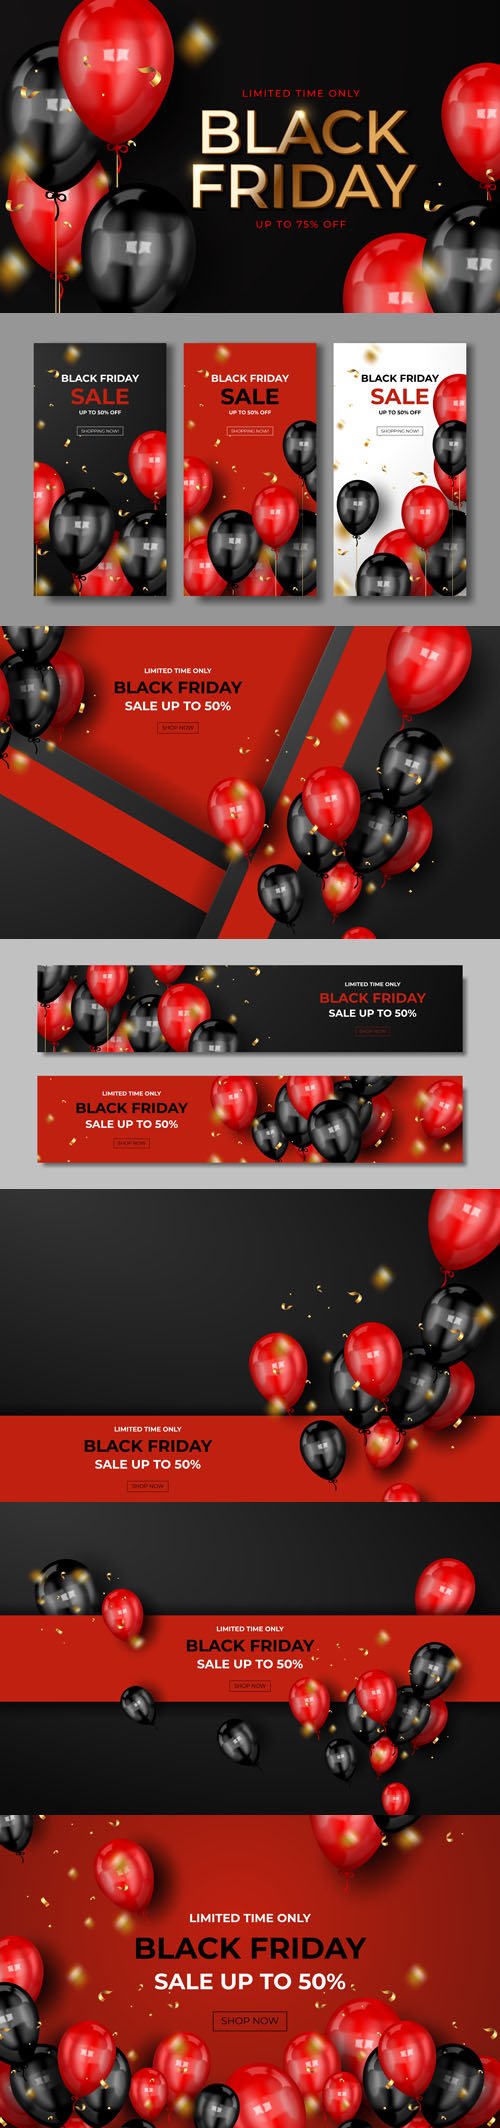 JJ0rejUIT2Z5iOzVo1rBiFx7R2axvl3S Black Friday Sale Banners & Backgrounds Vector Design Collection